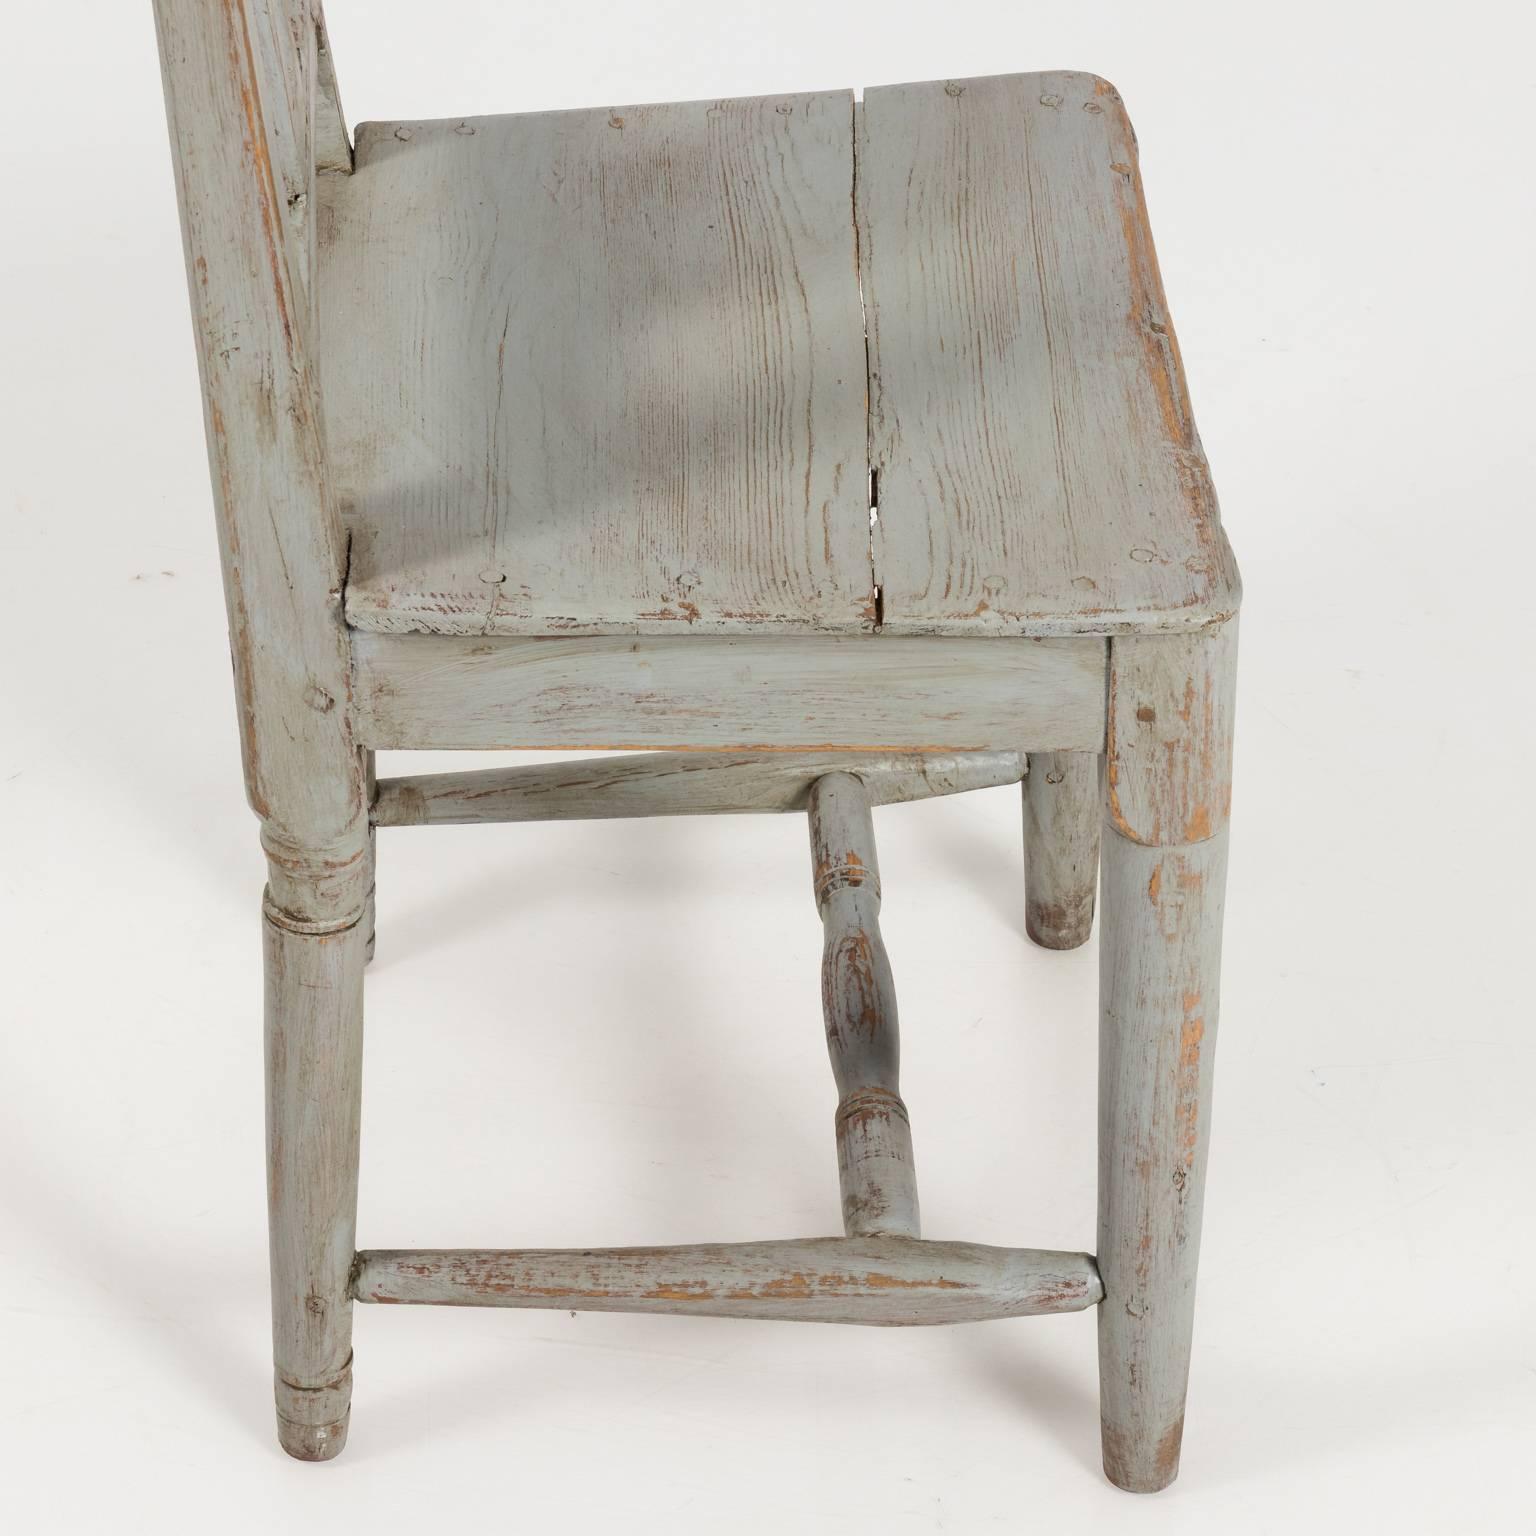 Set of six grey painted pinewood chairs that feature straight openwork packs, square seating, rounded ring turned legs, and an H-shaped cross stretcher, circa early 19th century. Please note that sizes of each chair vary according to construction